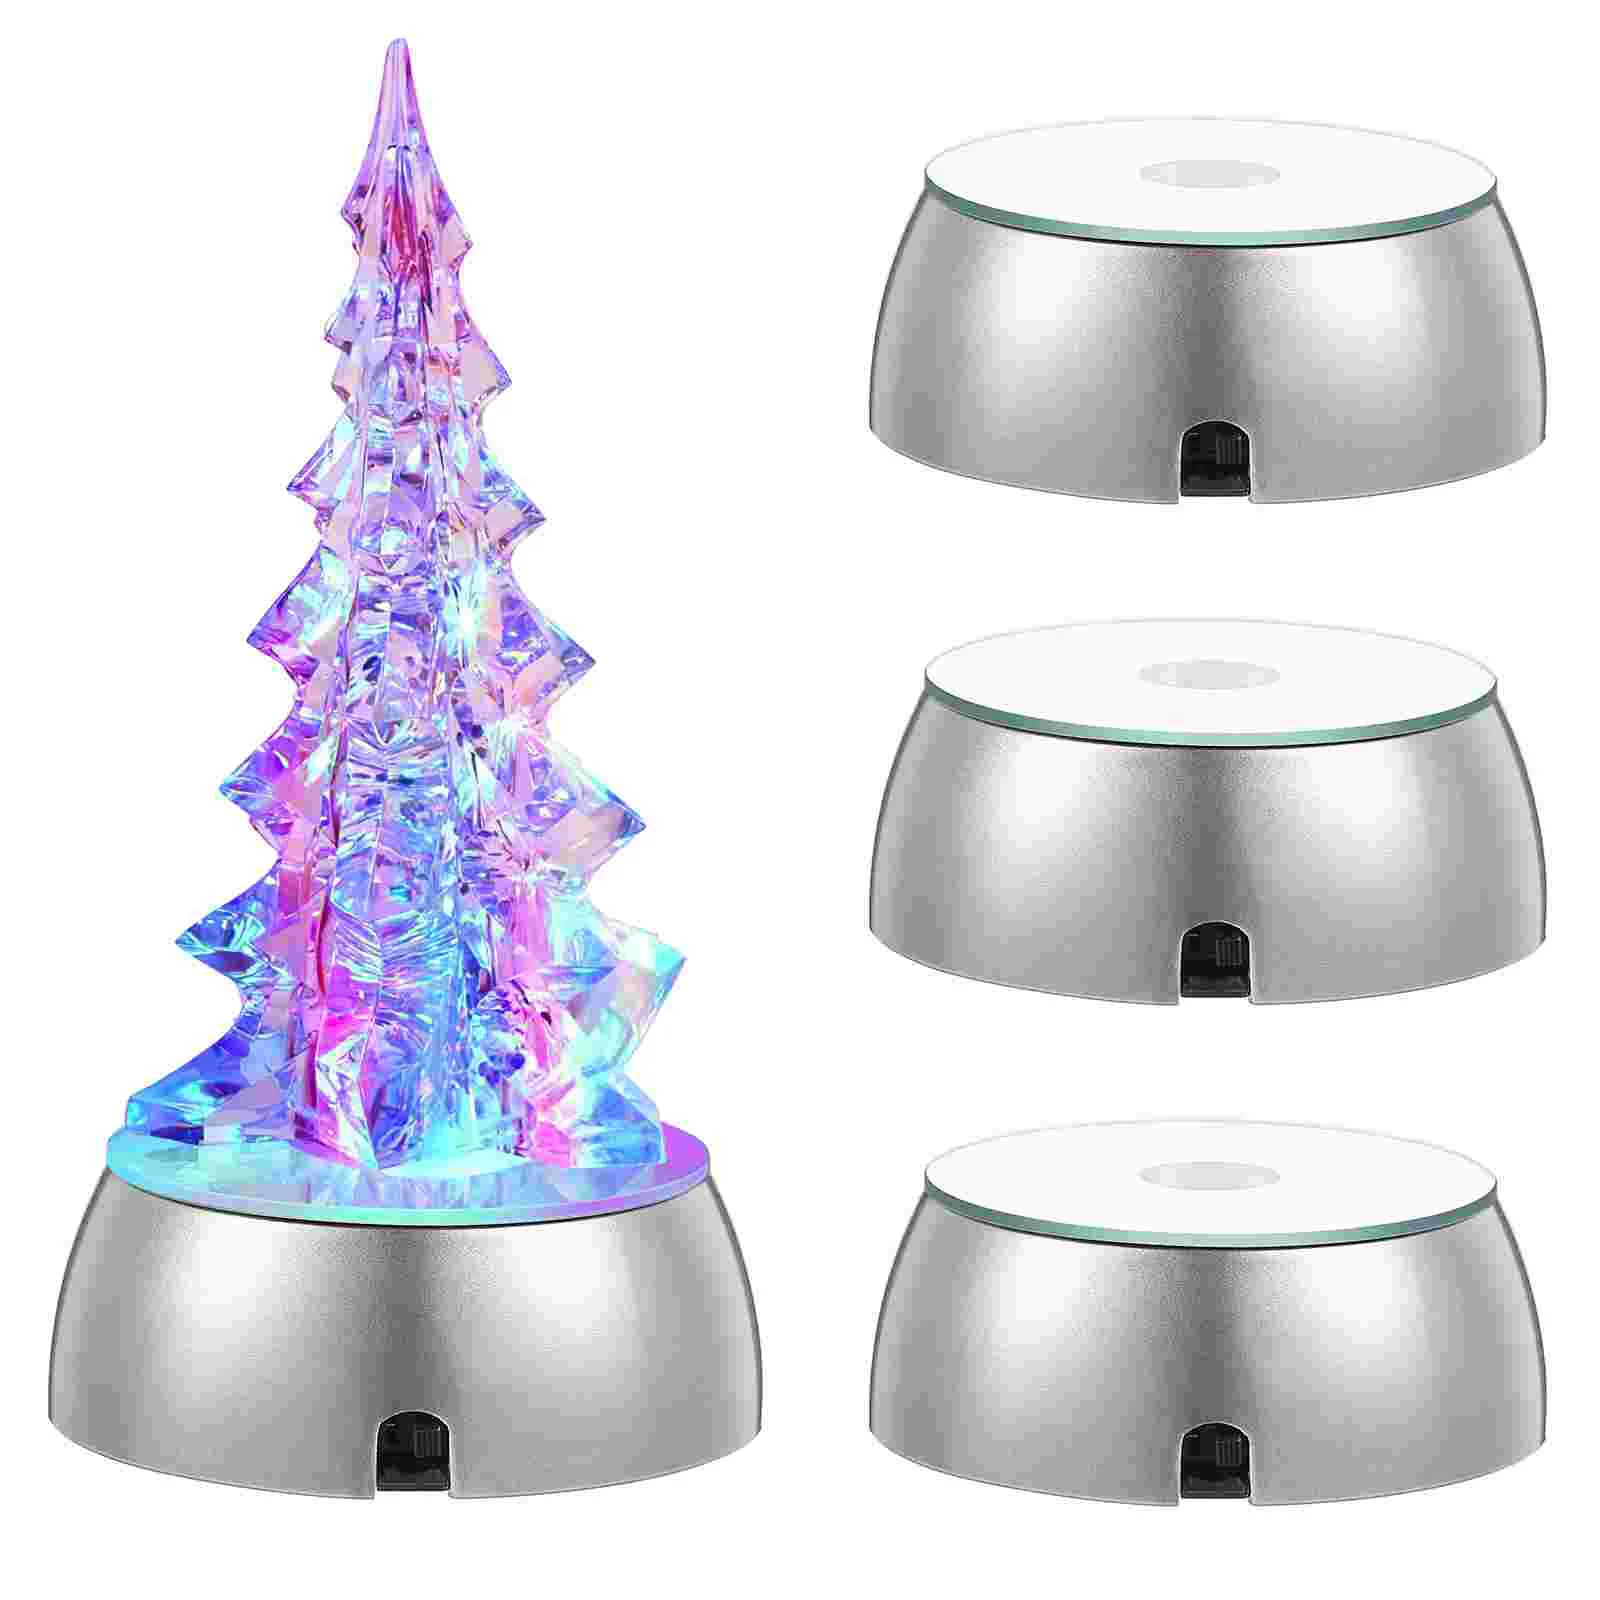 

4 Pcs Light Base Crystal Ball LED Plastic Crystals Display Stand Show Stands Bases Glass Shelf Lamp